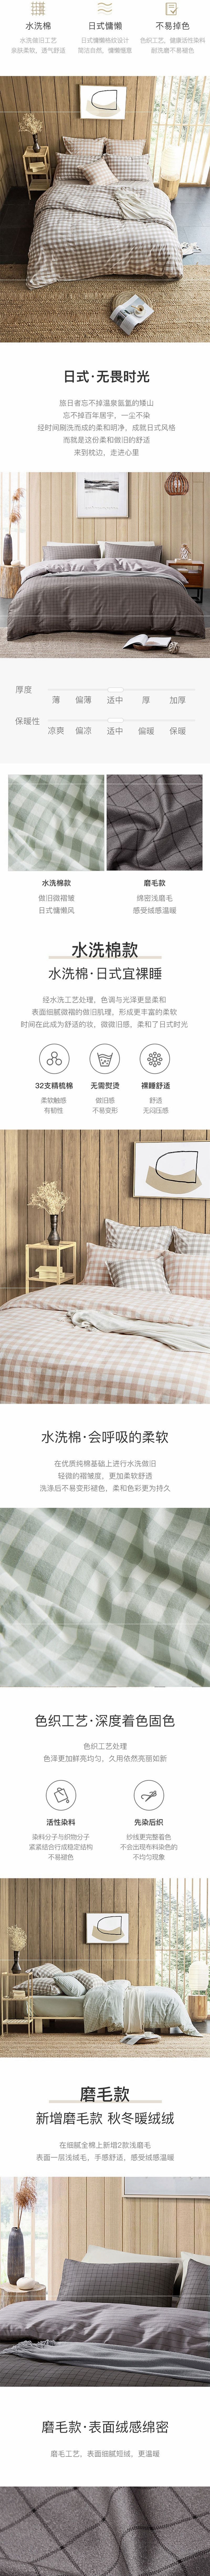 Lifease 4-Piece Plaid Cotton Bed Set with Duvet Cover-Large Twin/Full; Full/Queen-Fitted/Flat [5-7 Days U.S. Shipping]